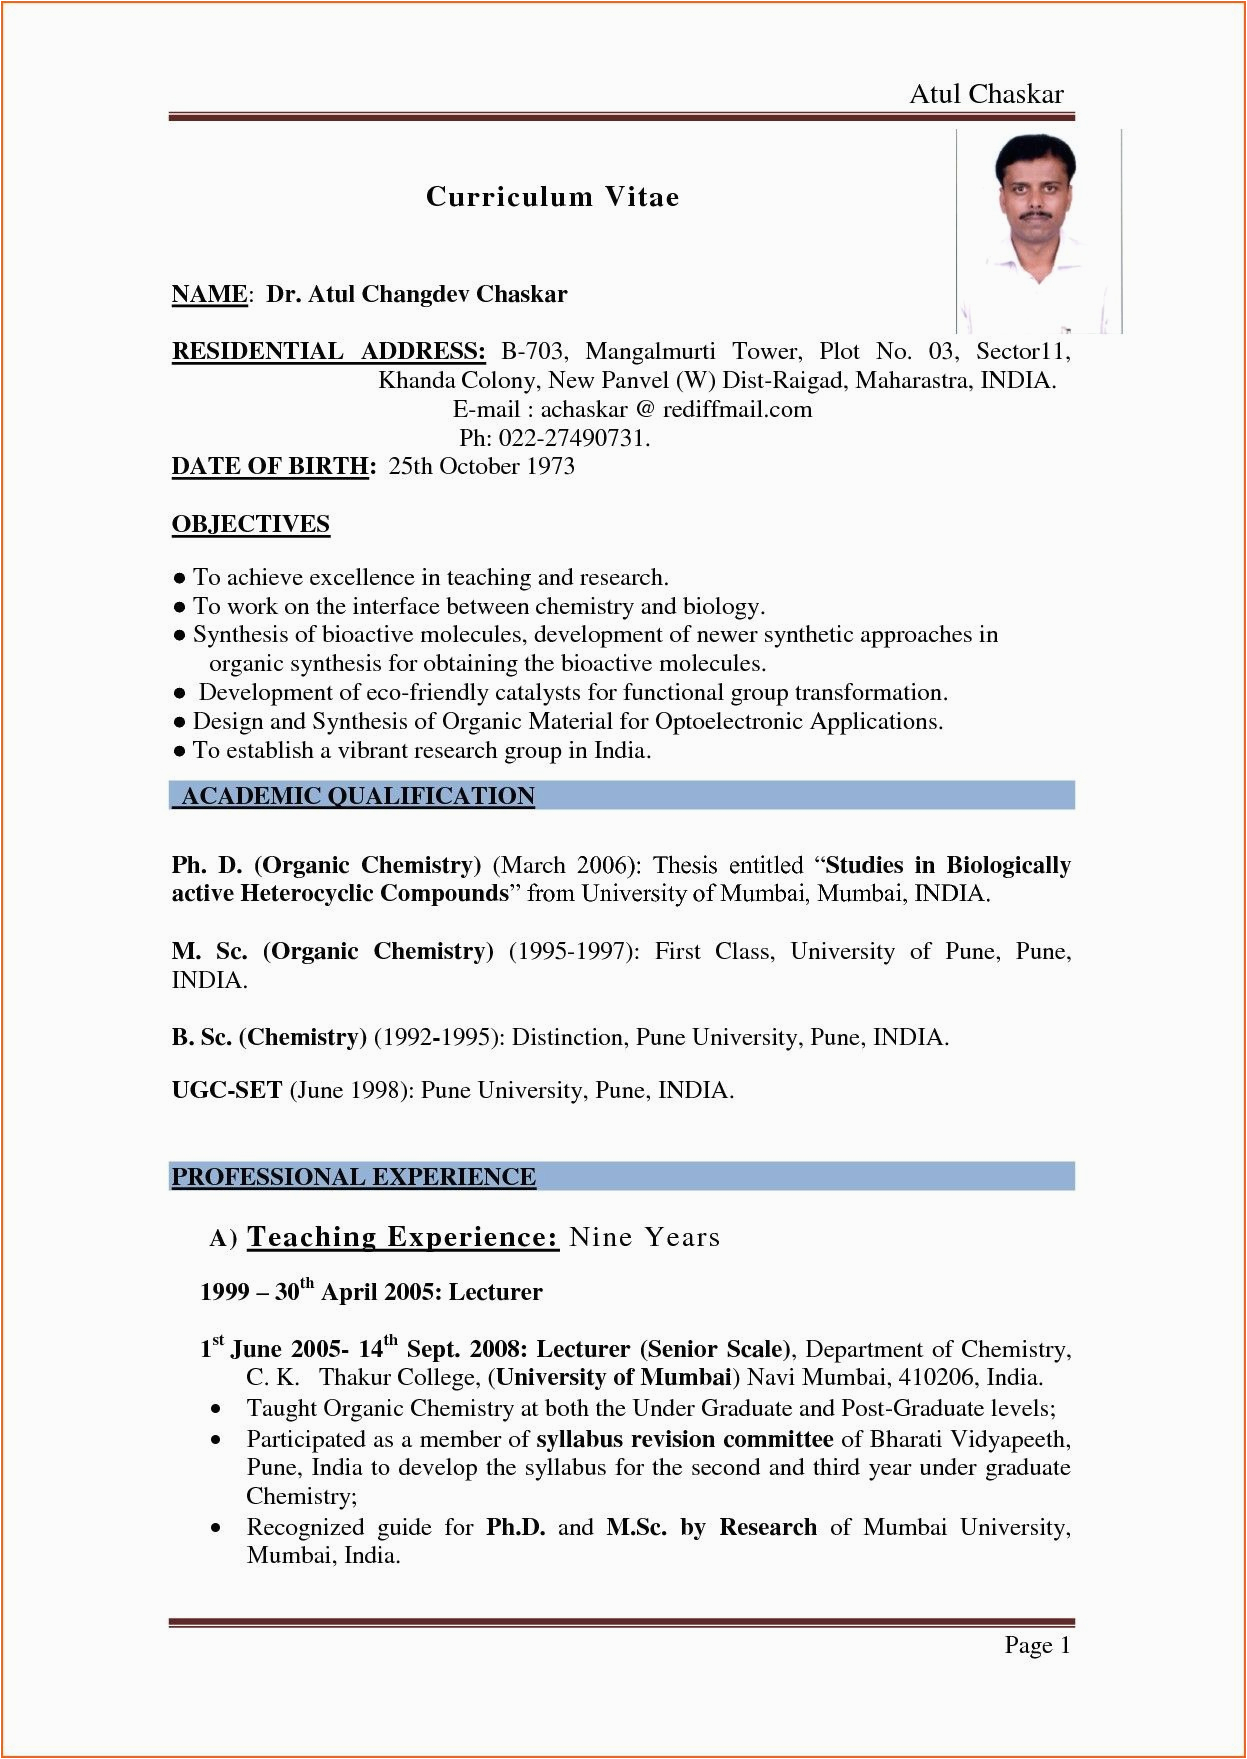 Sample Resume for College Principal In India Sample Resume for Teachers In India Pdf at Resume Sample